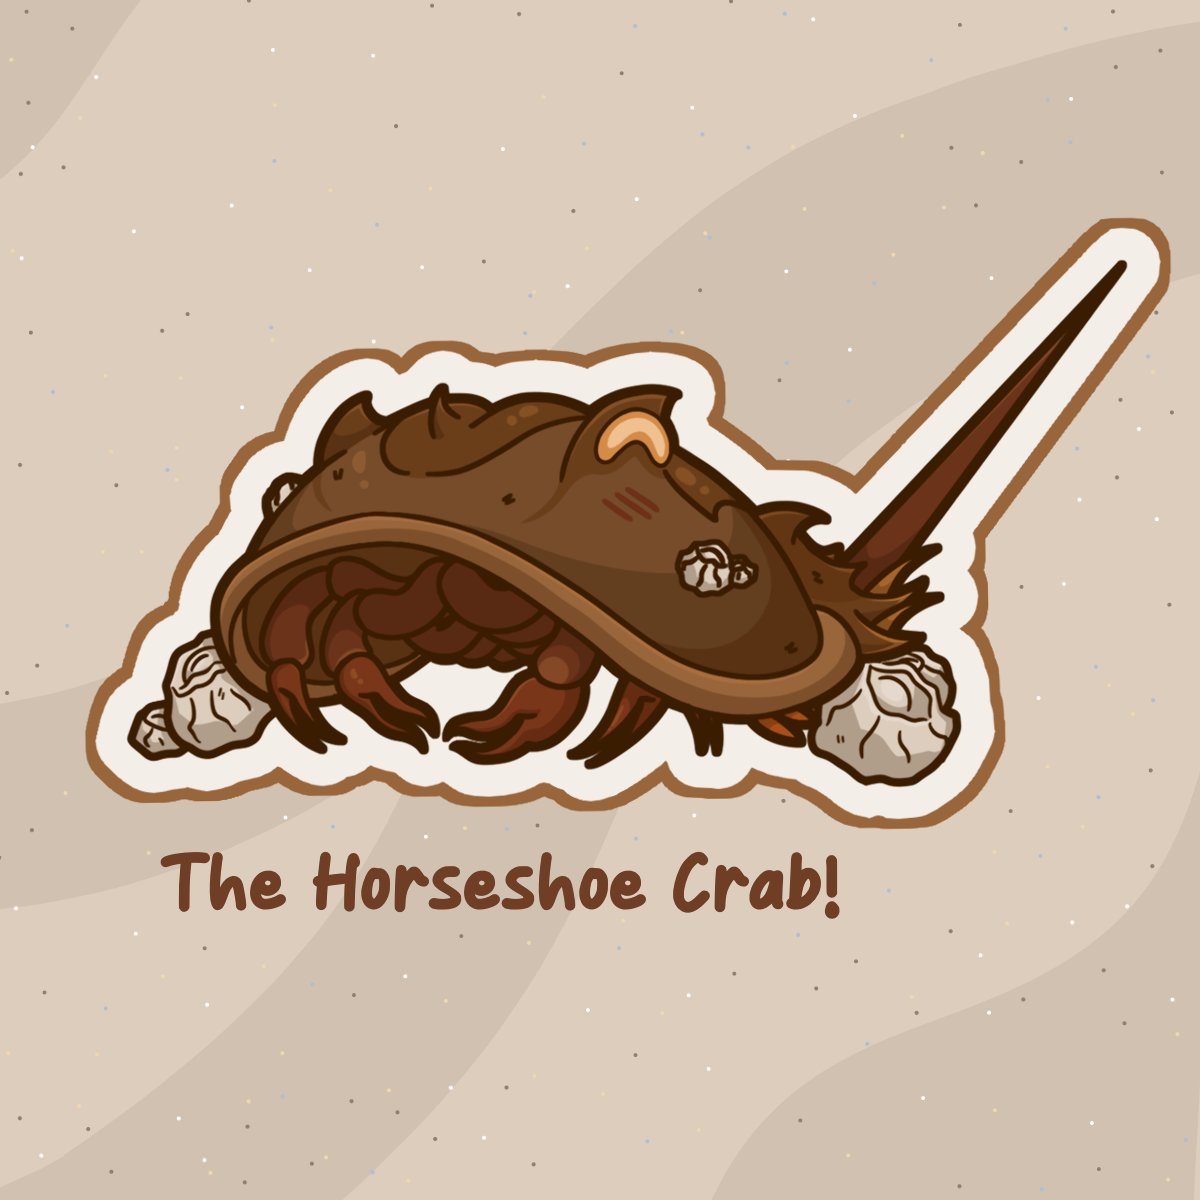 🐚 The Horseshoe Crab! 🐚

A closer look at Junes Crustacean of the Month Sticker design! 

Horseshoe Crabs are ancient marine arthropods that have been around for more than 300 million years! Today's Horseshoe Crabs aren't much different from fossils from 200 million years ago!